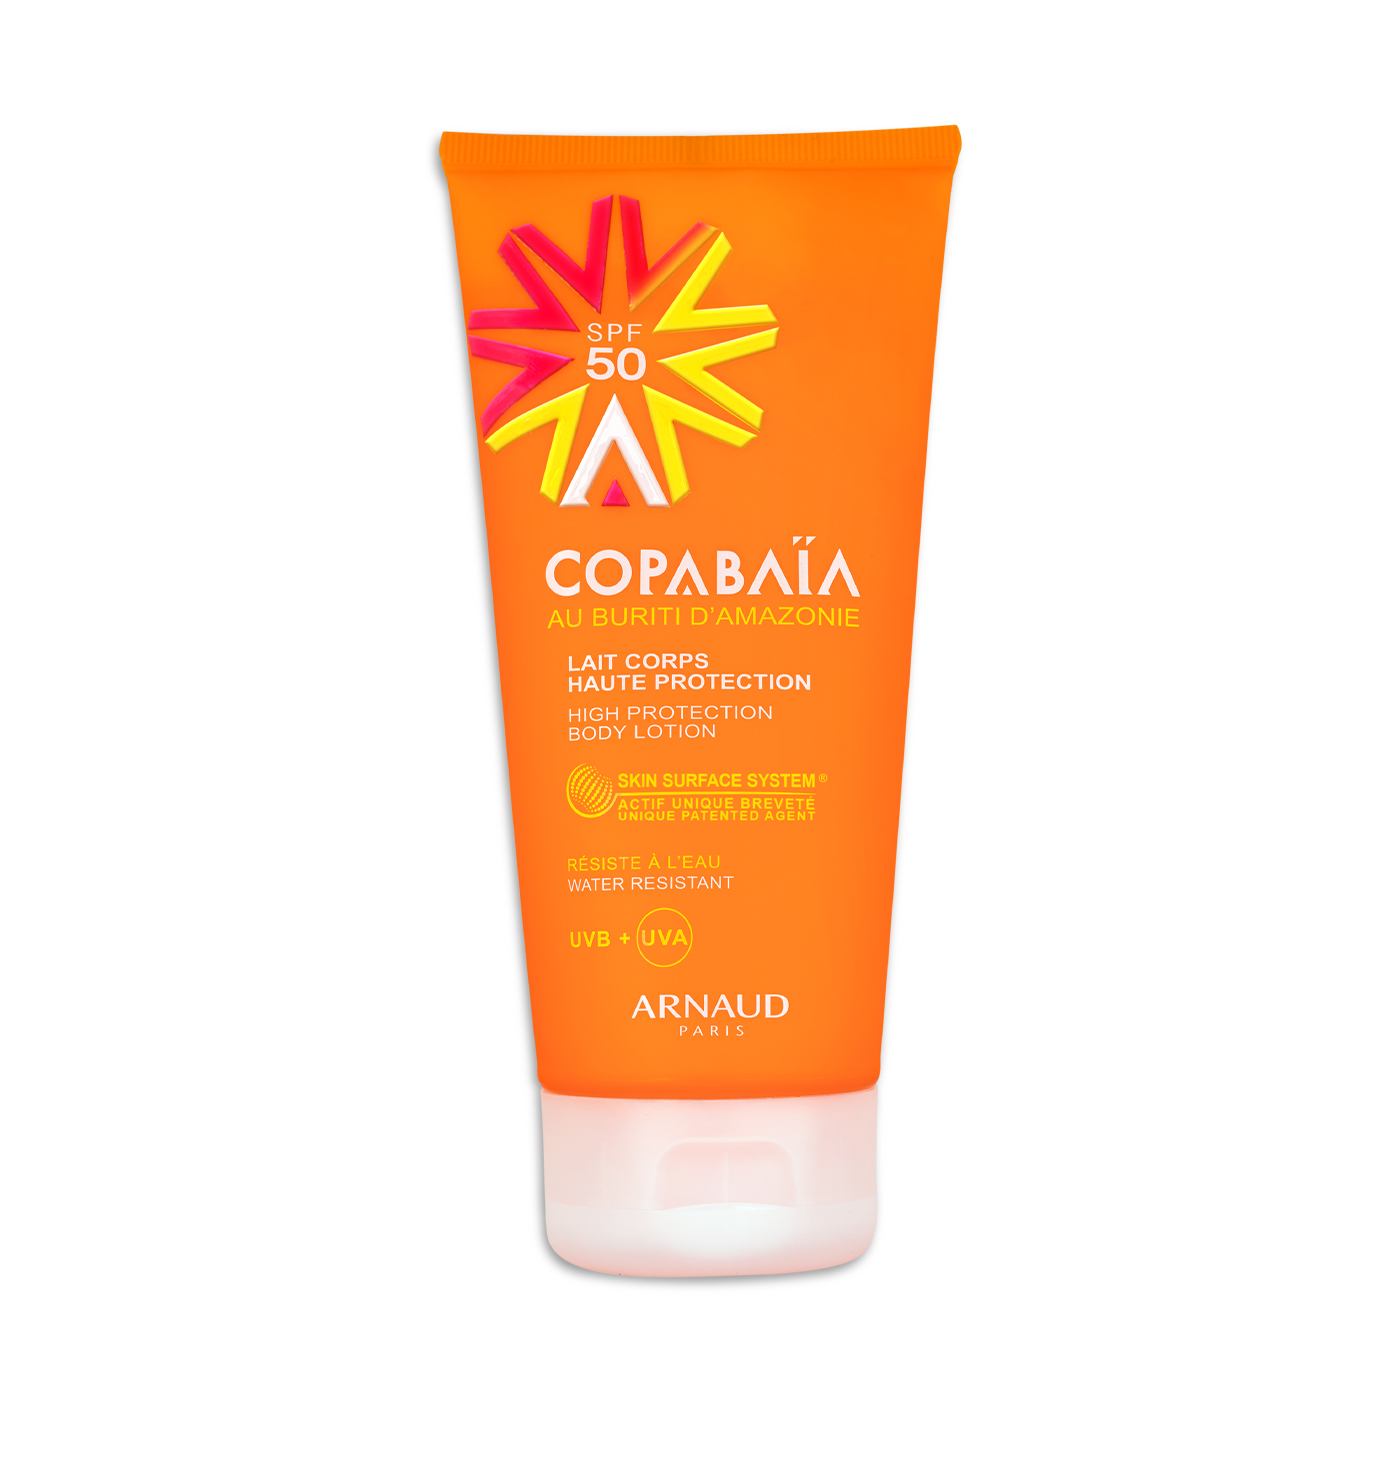 SPF50 High Protection Body Lotion